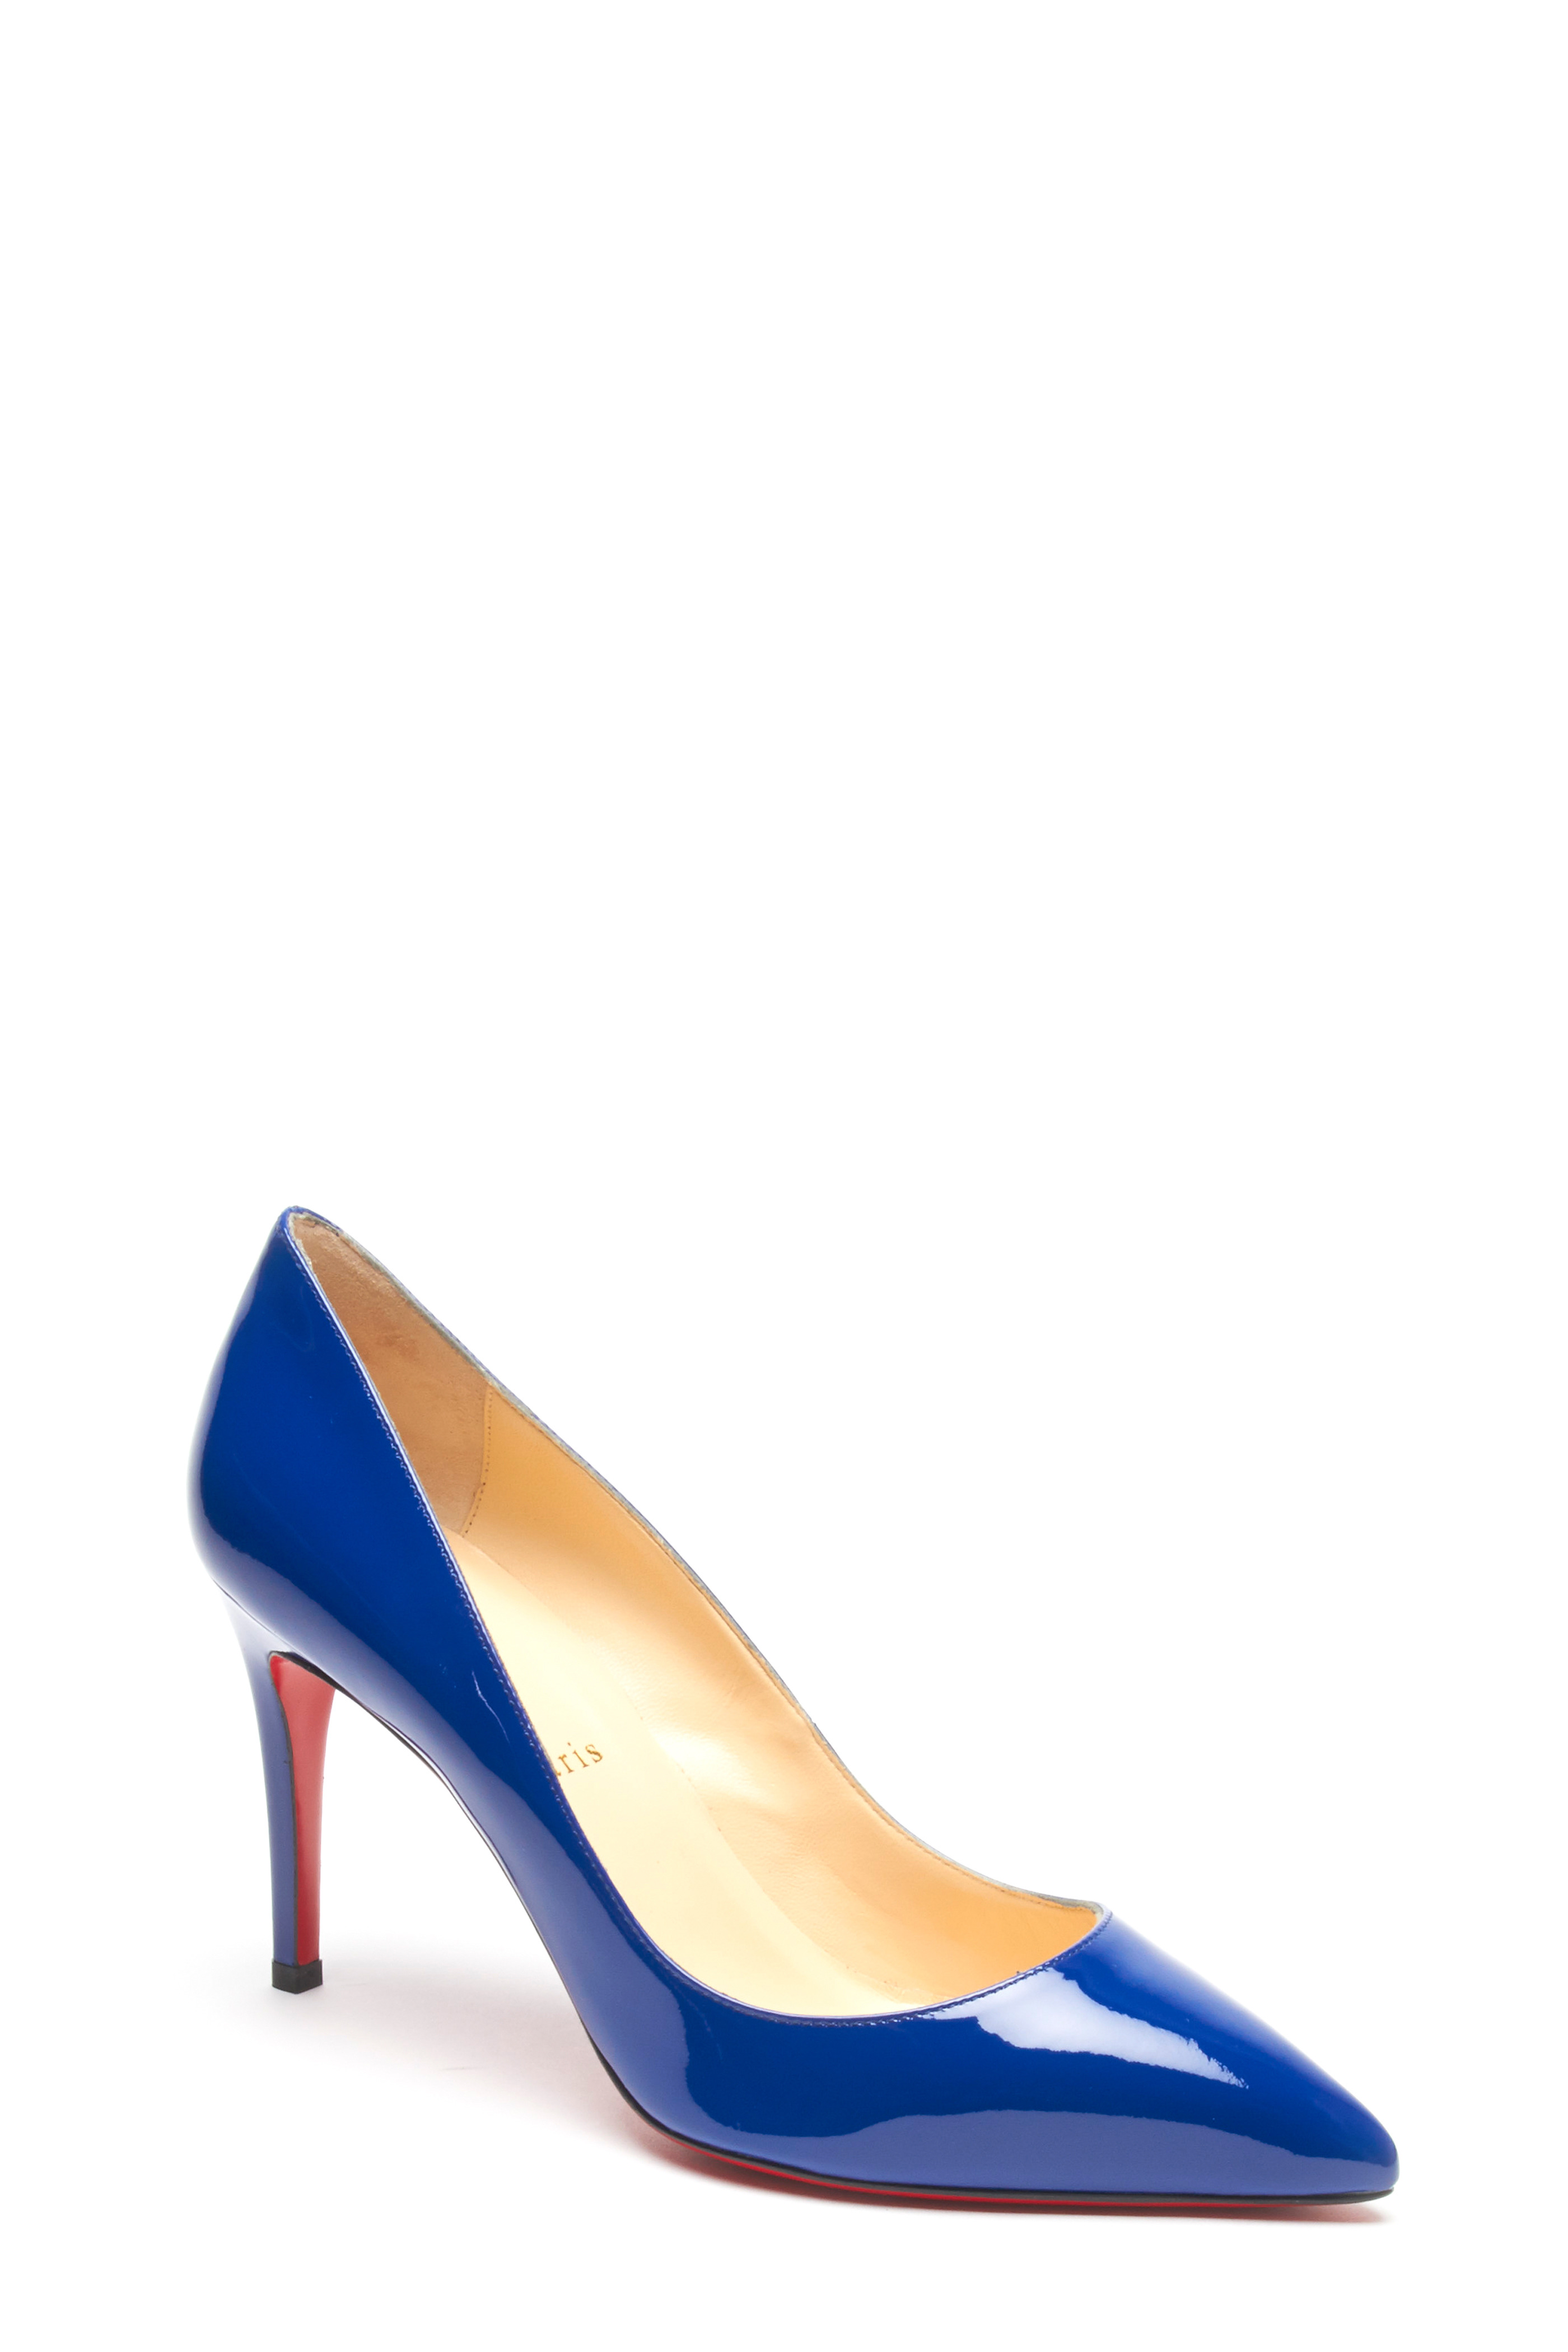 Louboutin - Pigalle Neptune Patent Leather Pump, 85mm Mitchell Stores